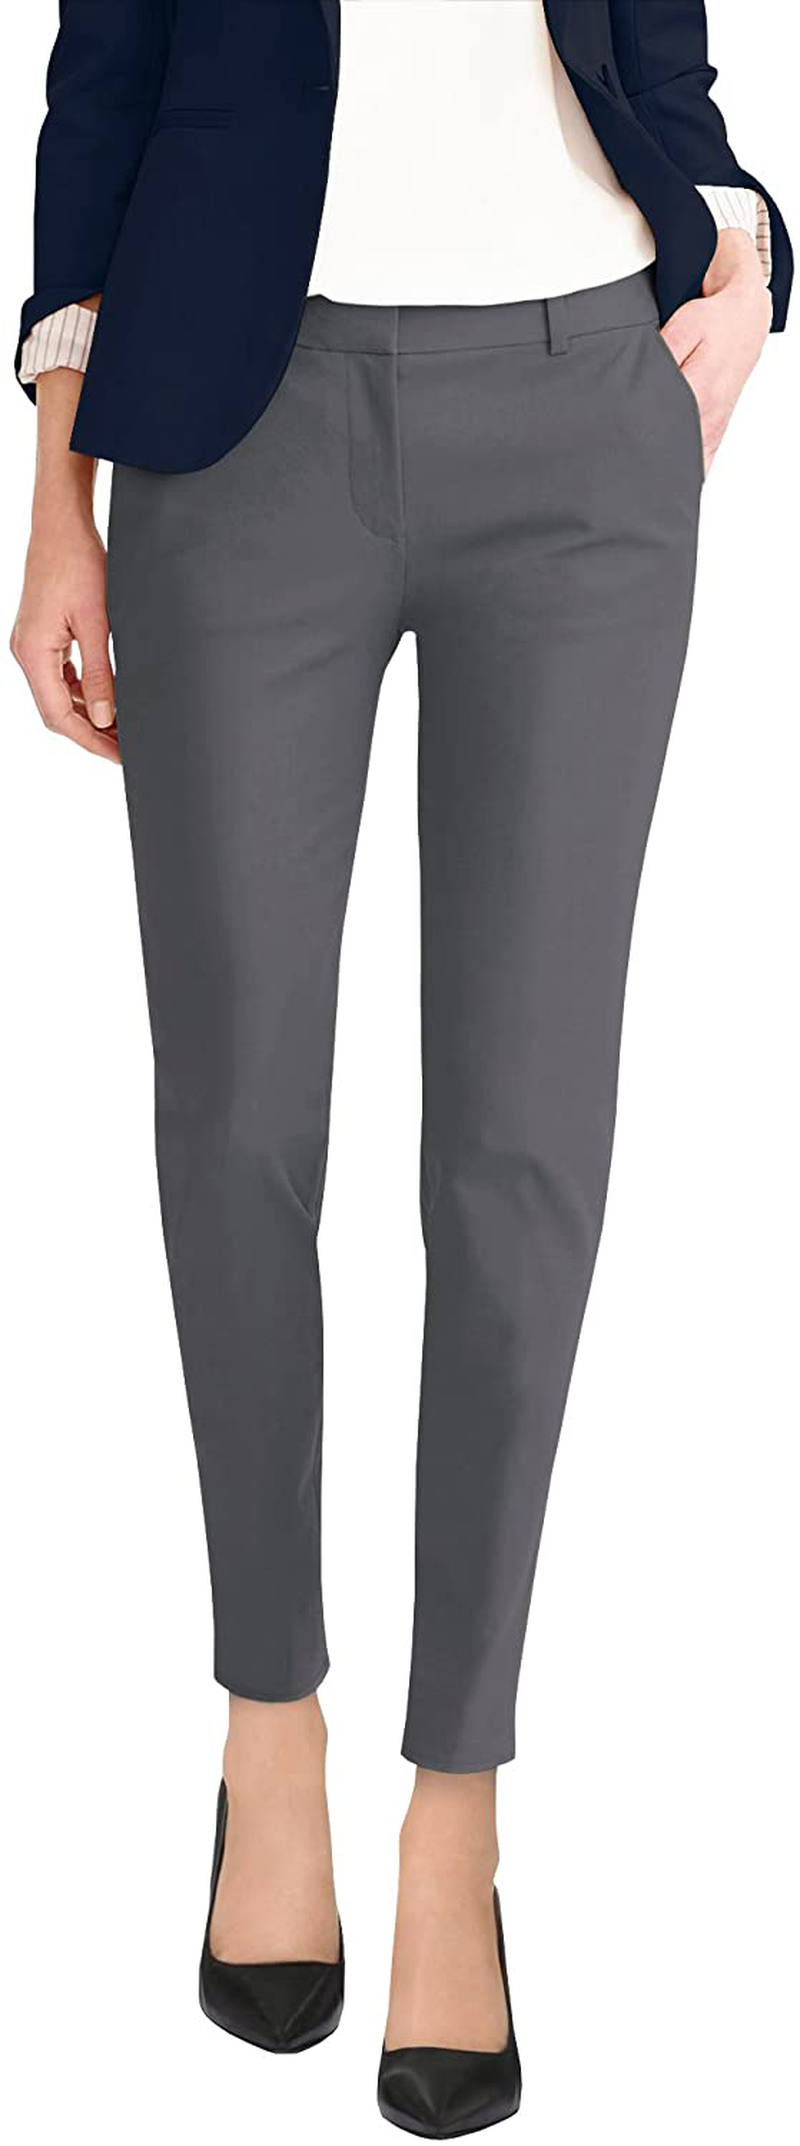 Hybrid & Company Womens Super Comfy Flat Front Stretch Trousers Pants